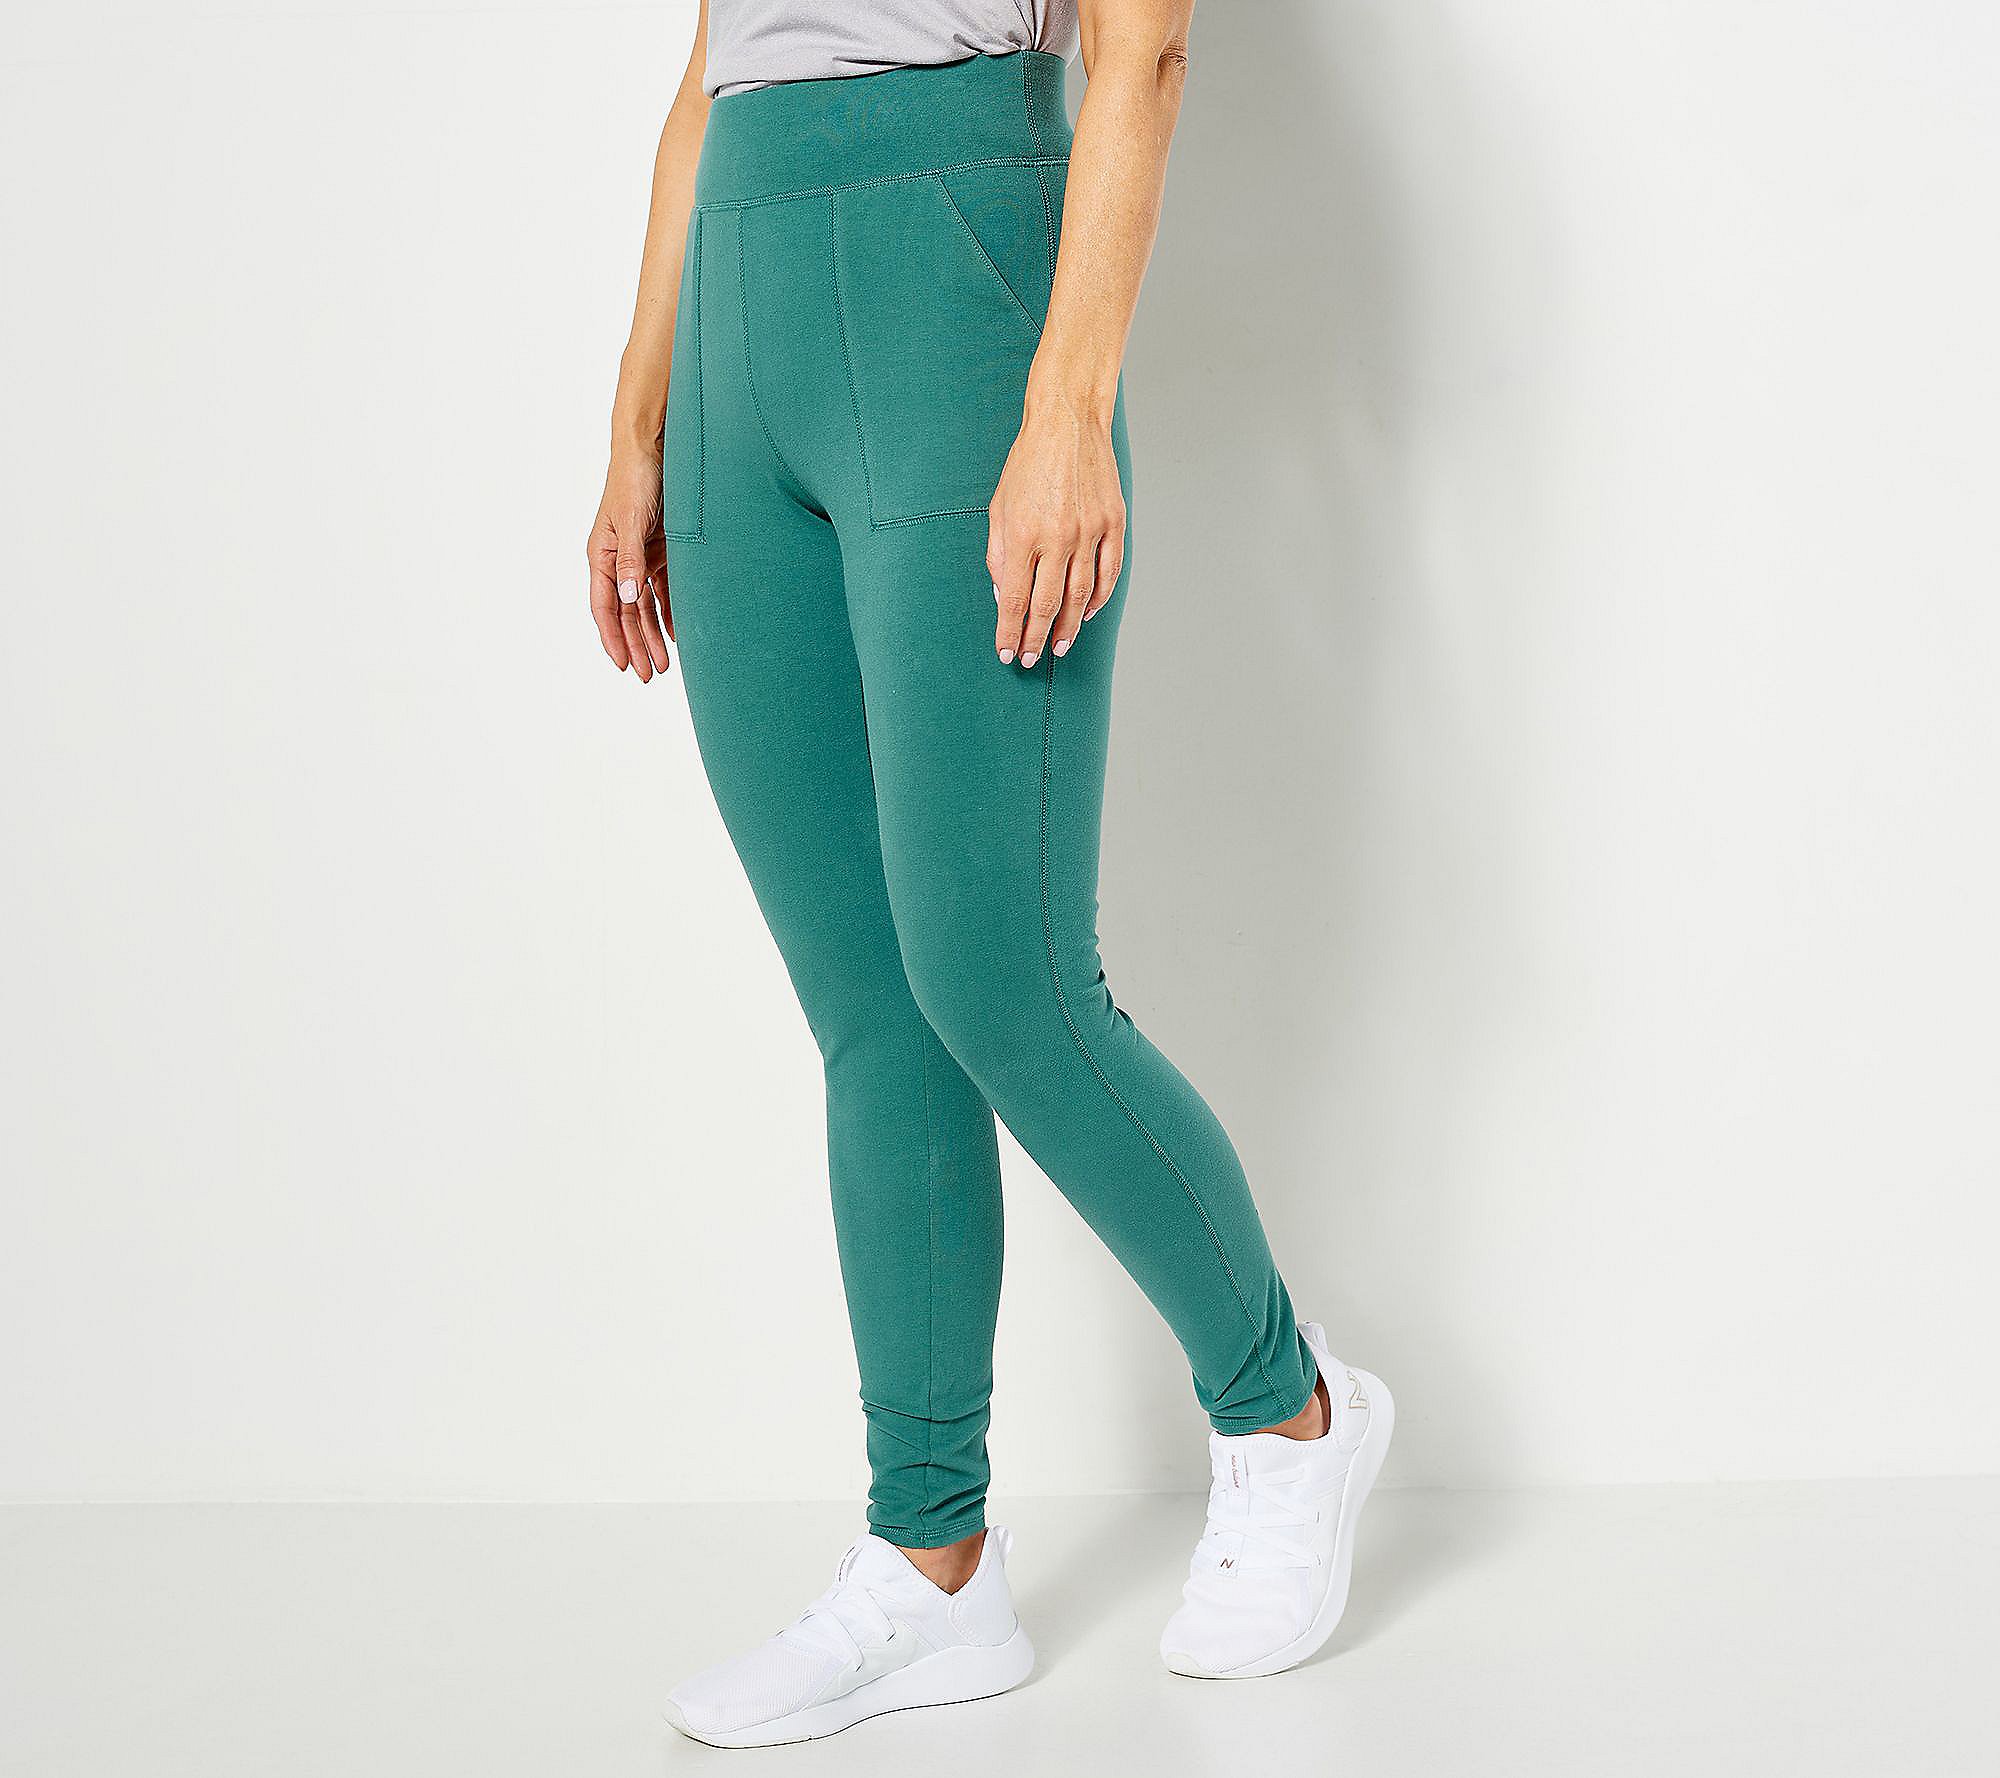 Denim & Co. Active Petite Duo Stretch Leggings with Wide Waistband